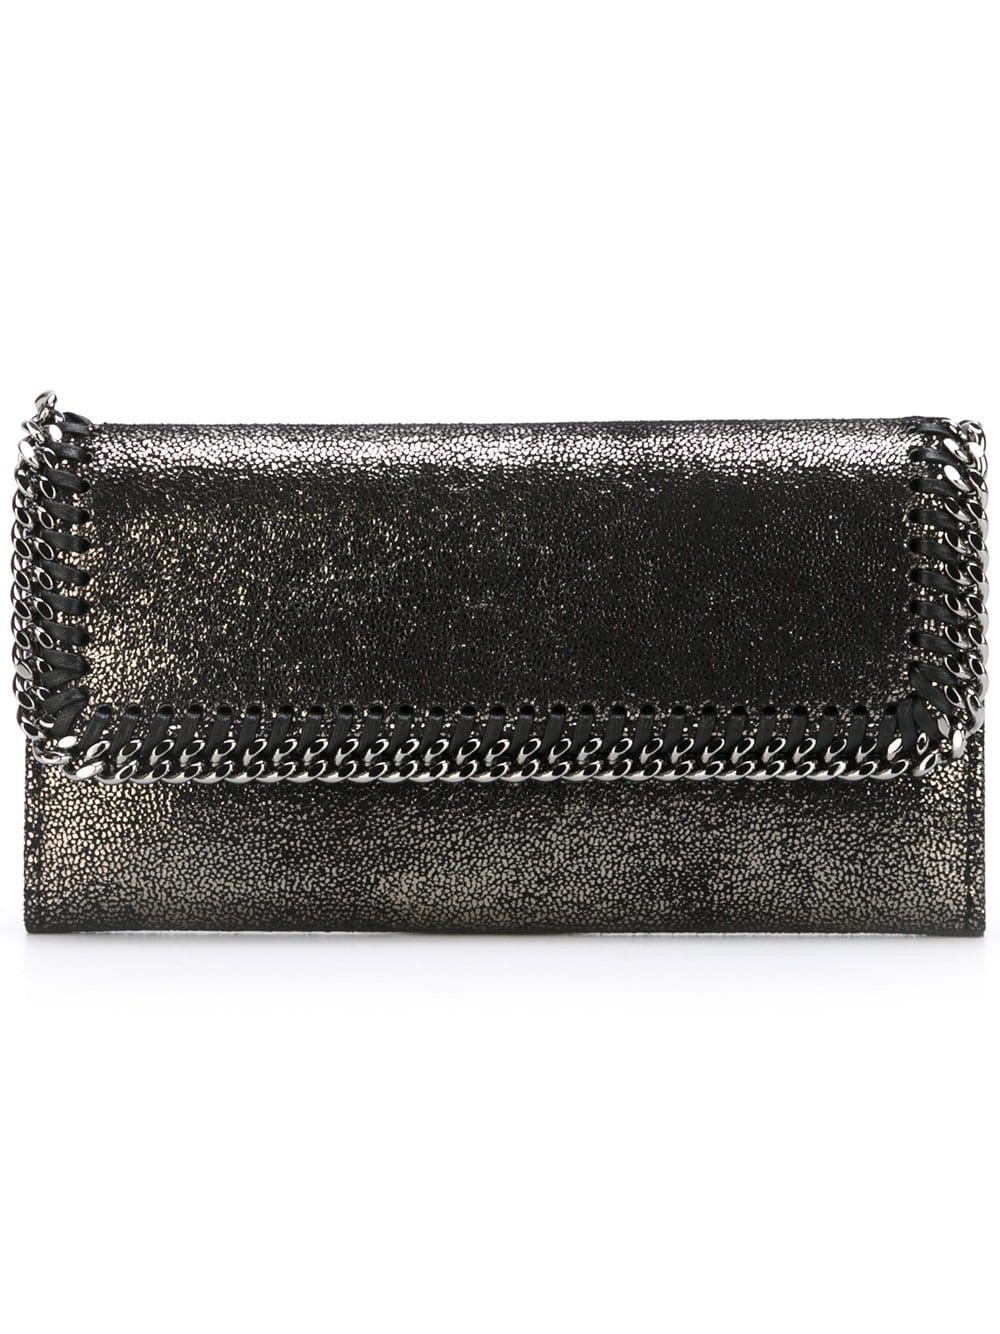 stella mccartney FALABELLA WALLET available on montiboutique.com - 24457